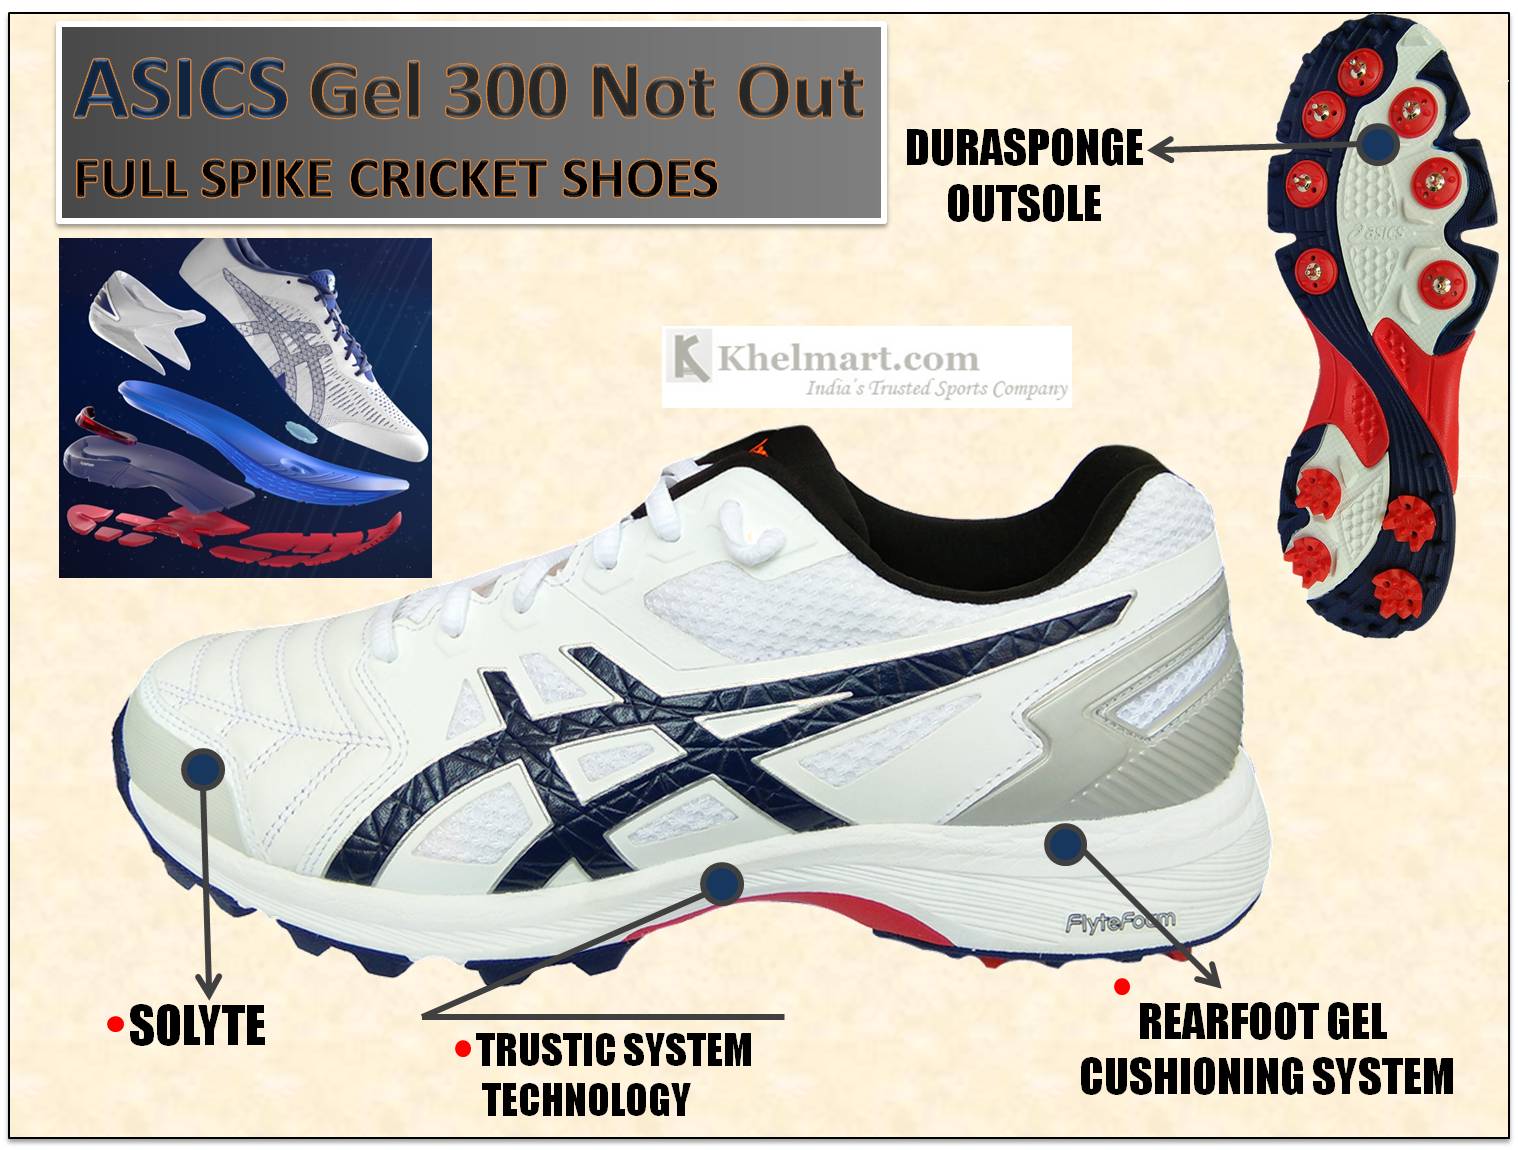 Asics_Gel_300_Not_Out_Full_Spike_Cricket_Shoes_color_White_and_Peacoat.jpg